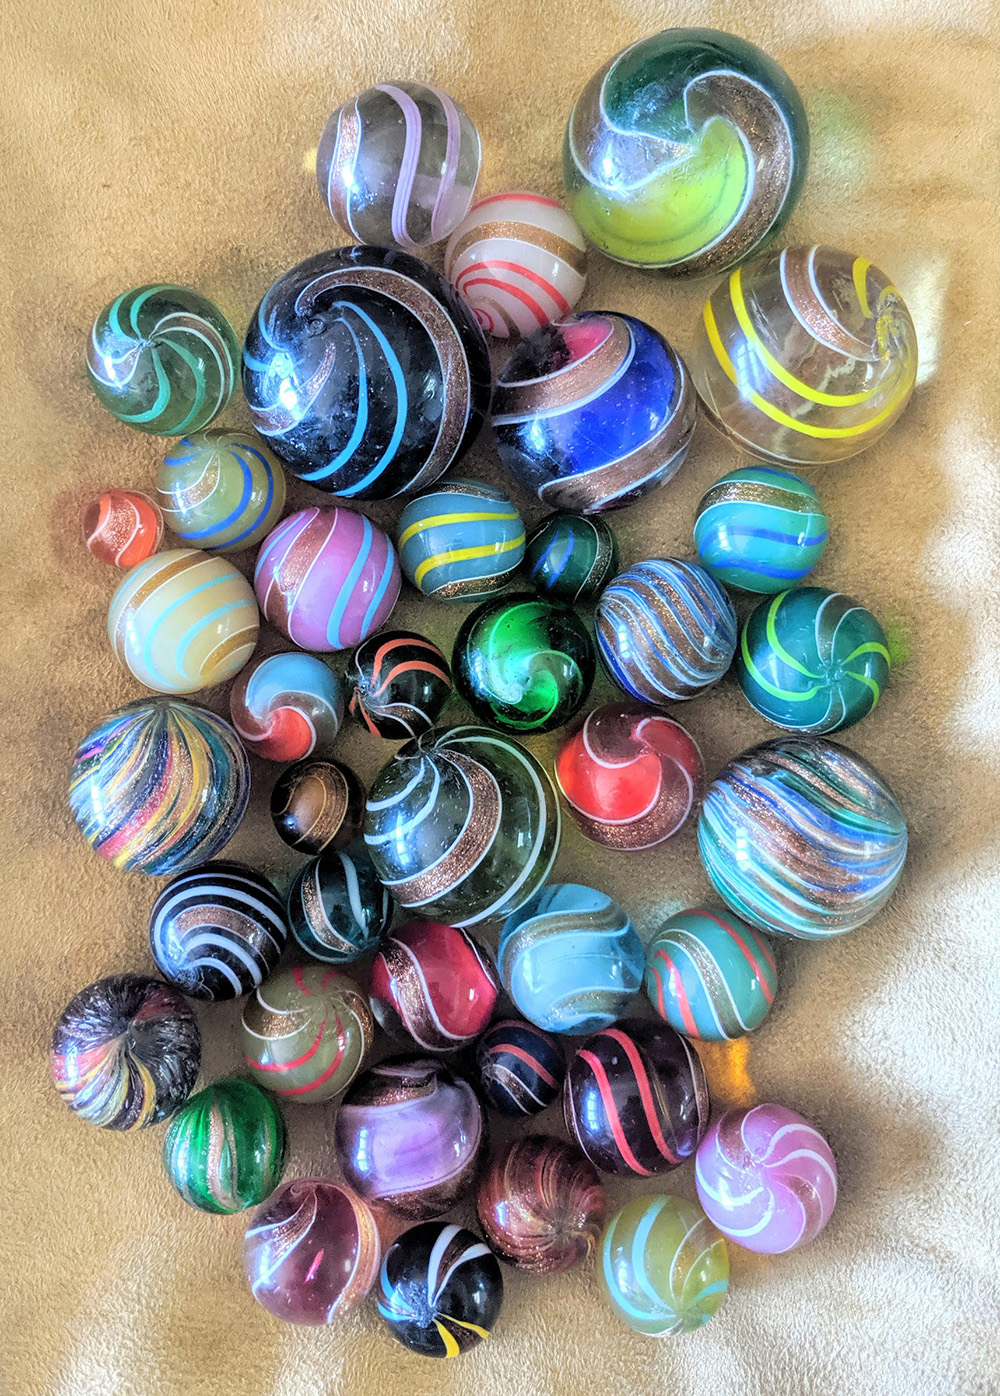 Group of Lutz marbles